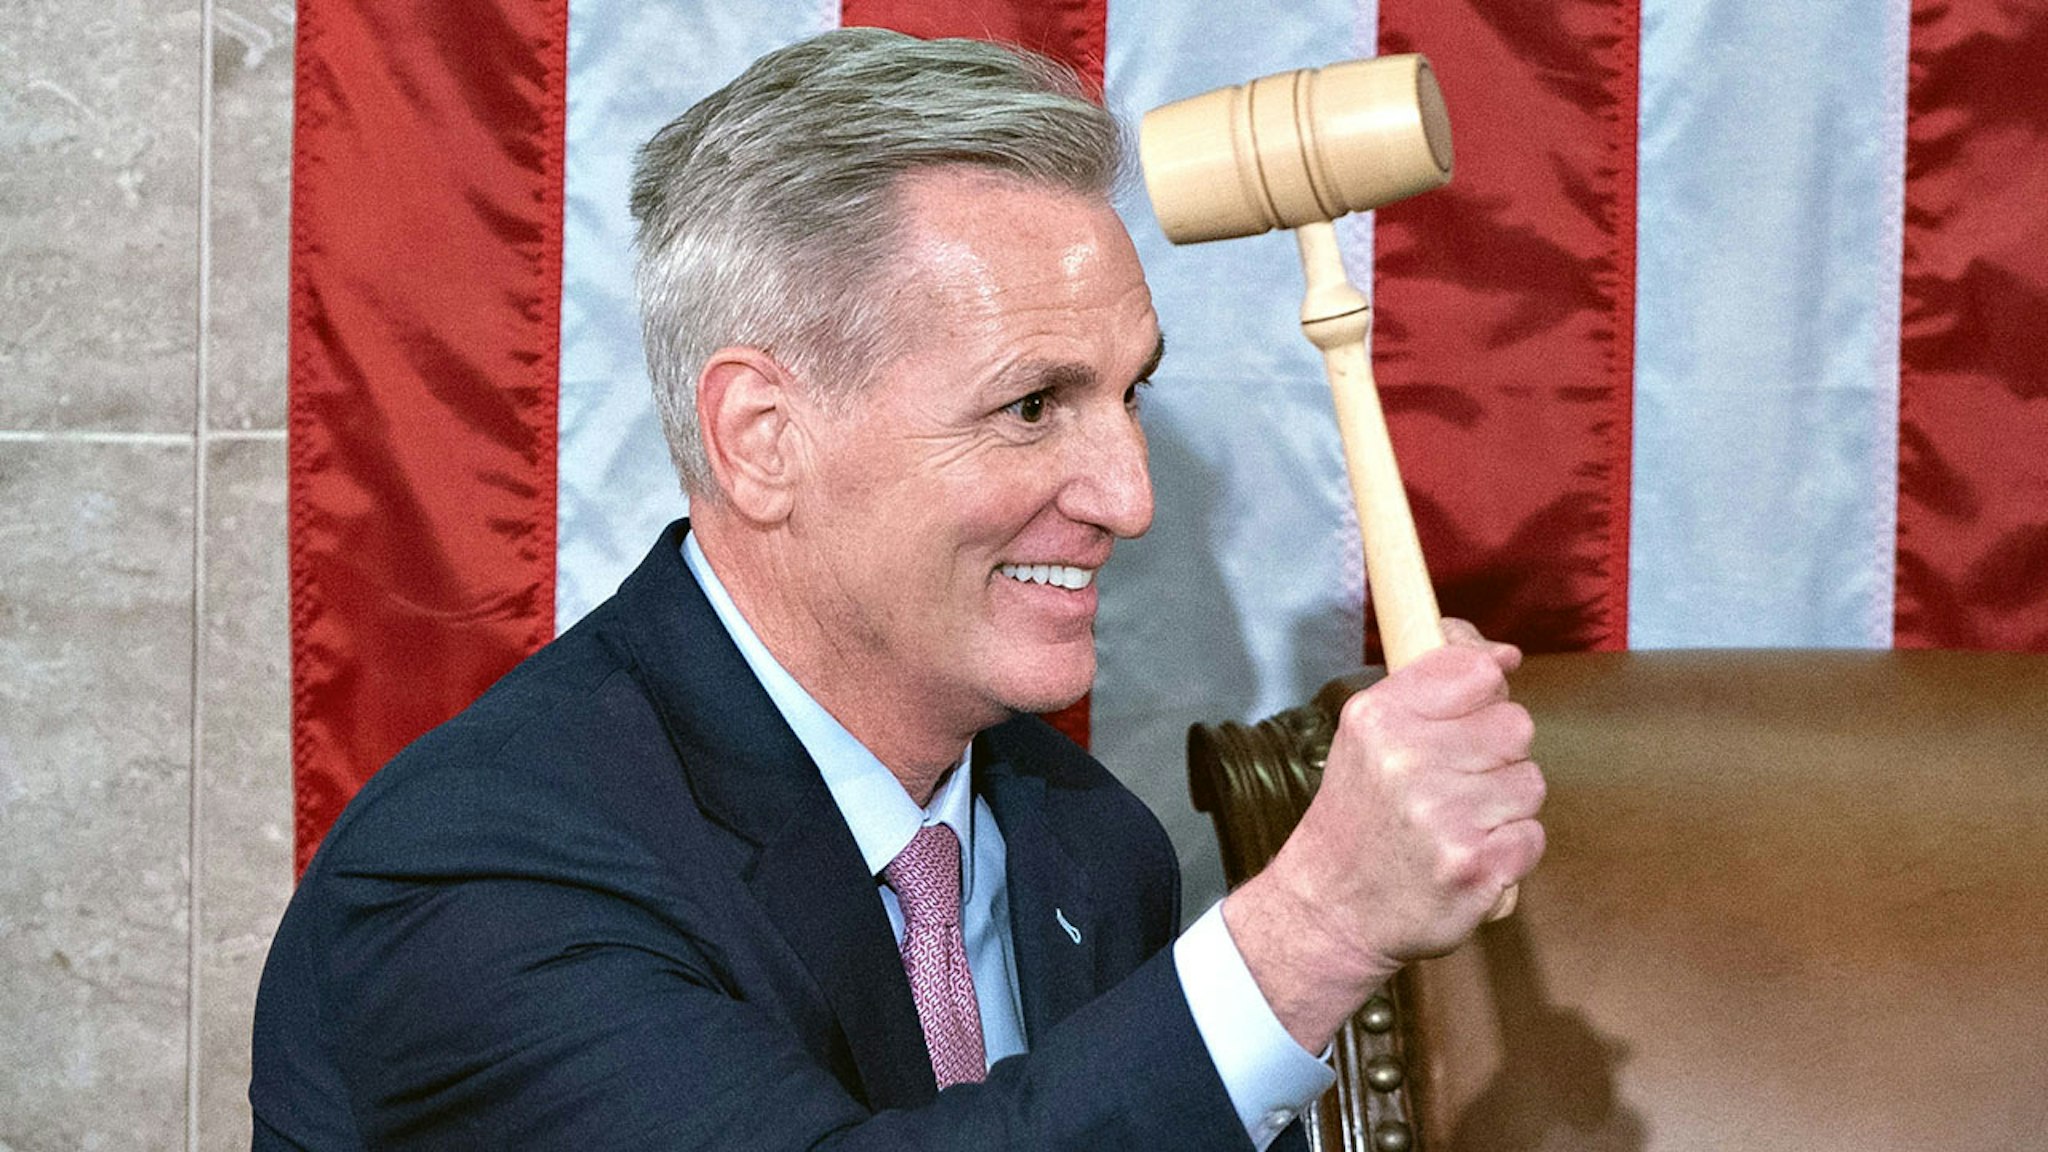 Representative Kevin McCarthy, a Republican from California, holds the Speaker's gavel after becoming House speaker during a meeting of the 118th Congress in the House Chamber at the US Capitol in Washington, DC, US, Saturday, Jan. 7, 2023. McCarthy achieved his long-held ambition of becoming House speaker after quelling a rebellion by GOP conservative hardliners, but at the cost of further weakening his precarious position within a sharply divided party.